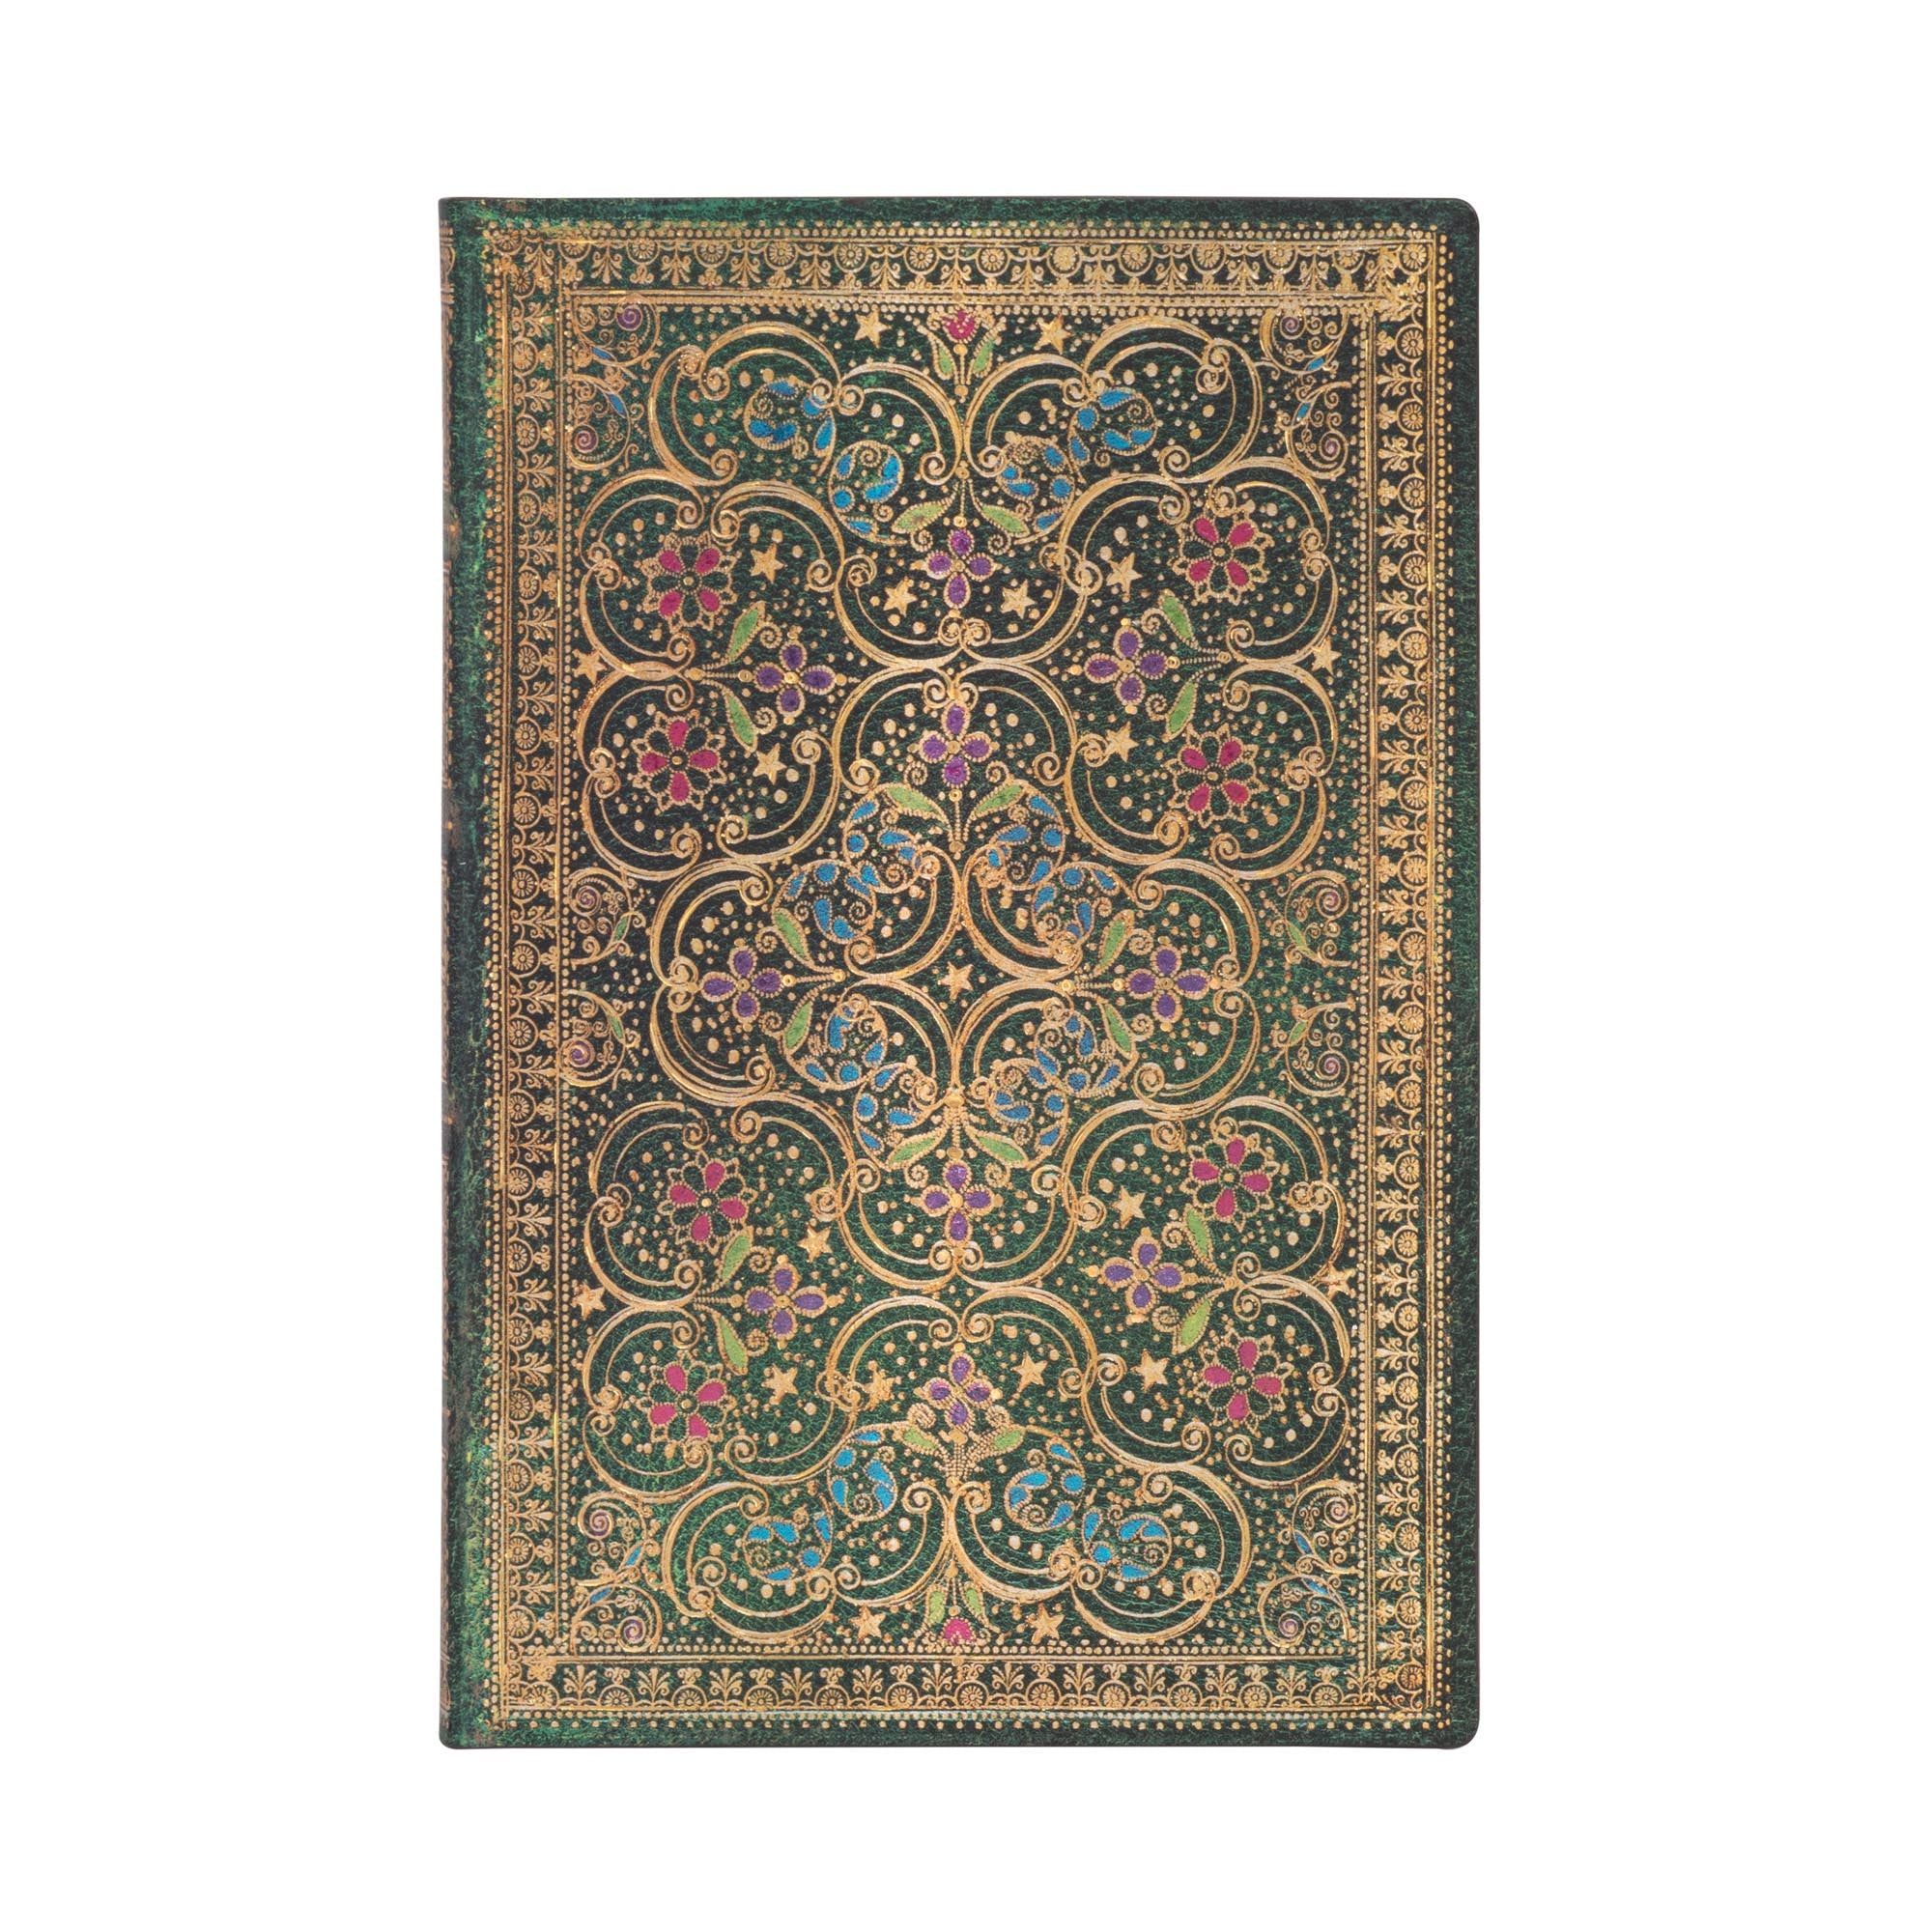 Paperblanks Pinnacle Lined Mini Softcover Notebook    